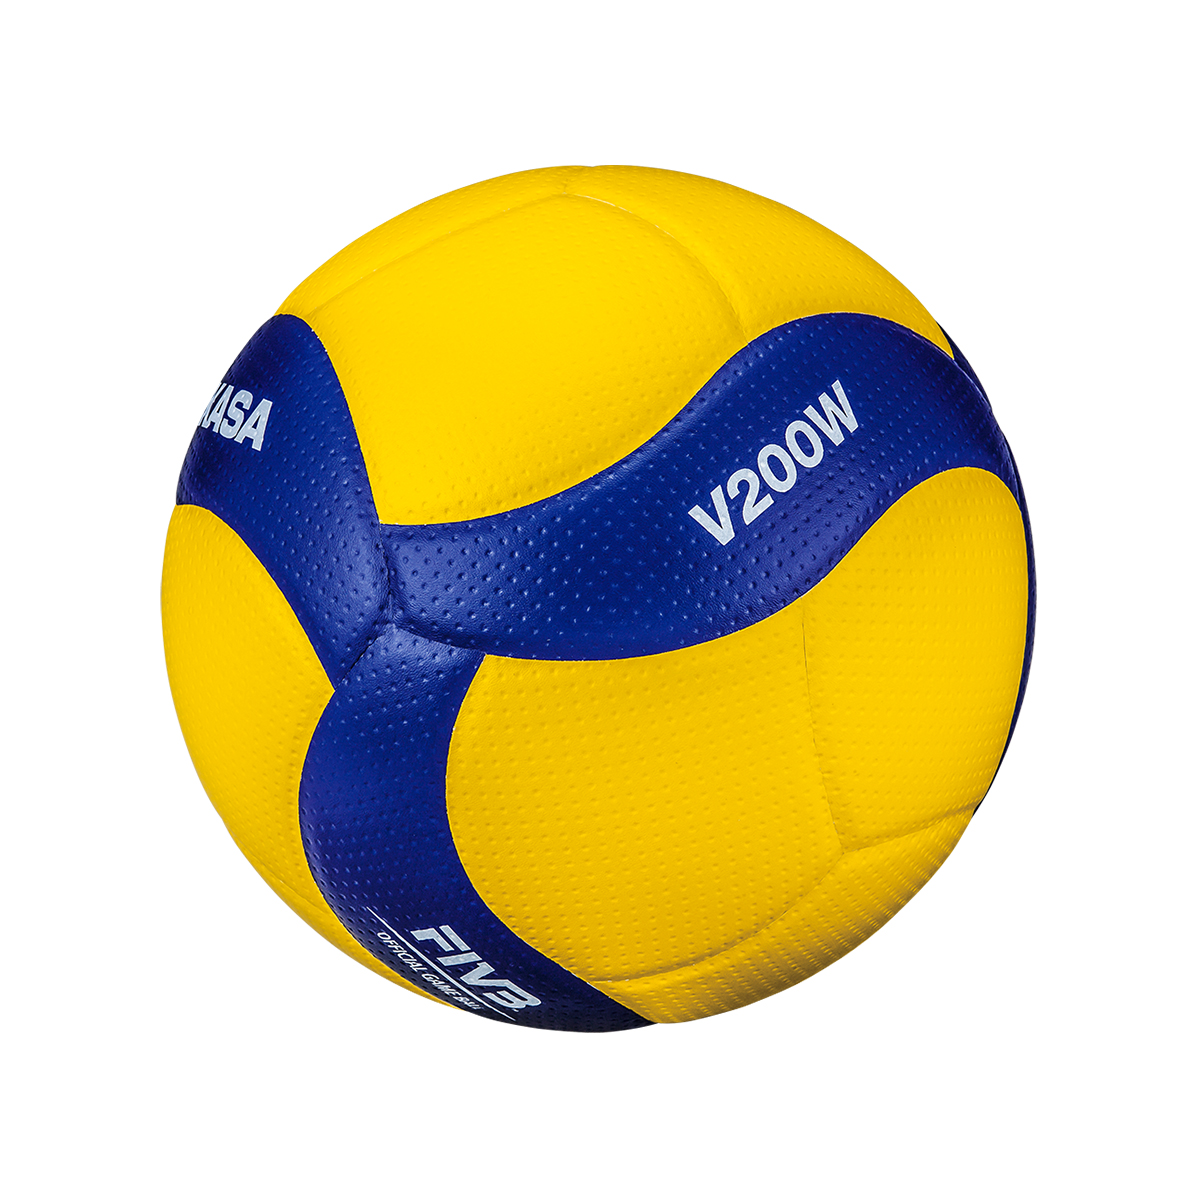 MIKASA V200W VW SERIES VOLLEYBALL DOUBLE DIMPLED 18 PANEL SIZE 5, , large image number null